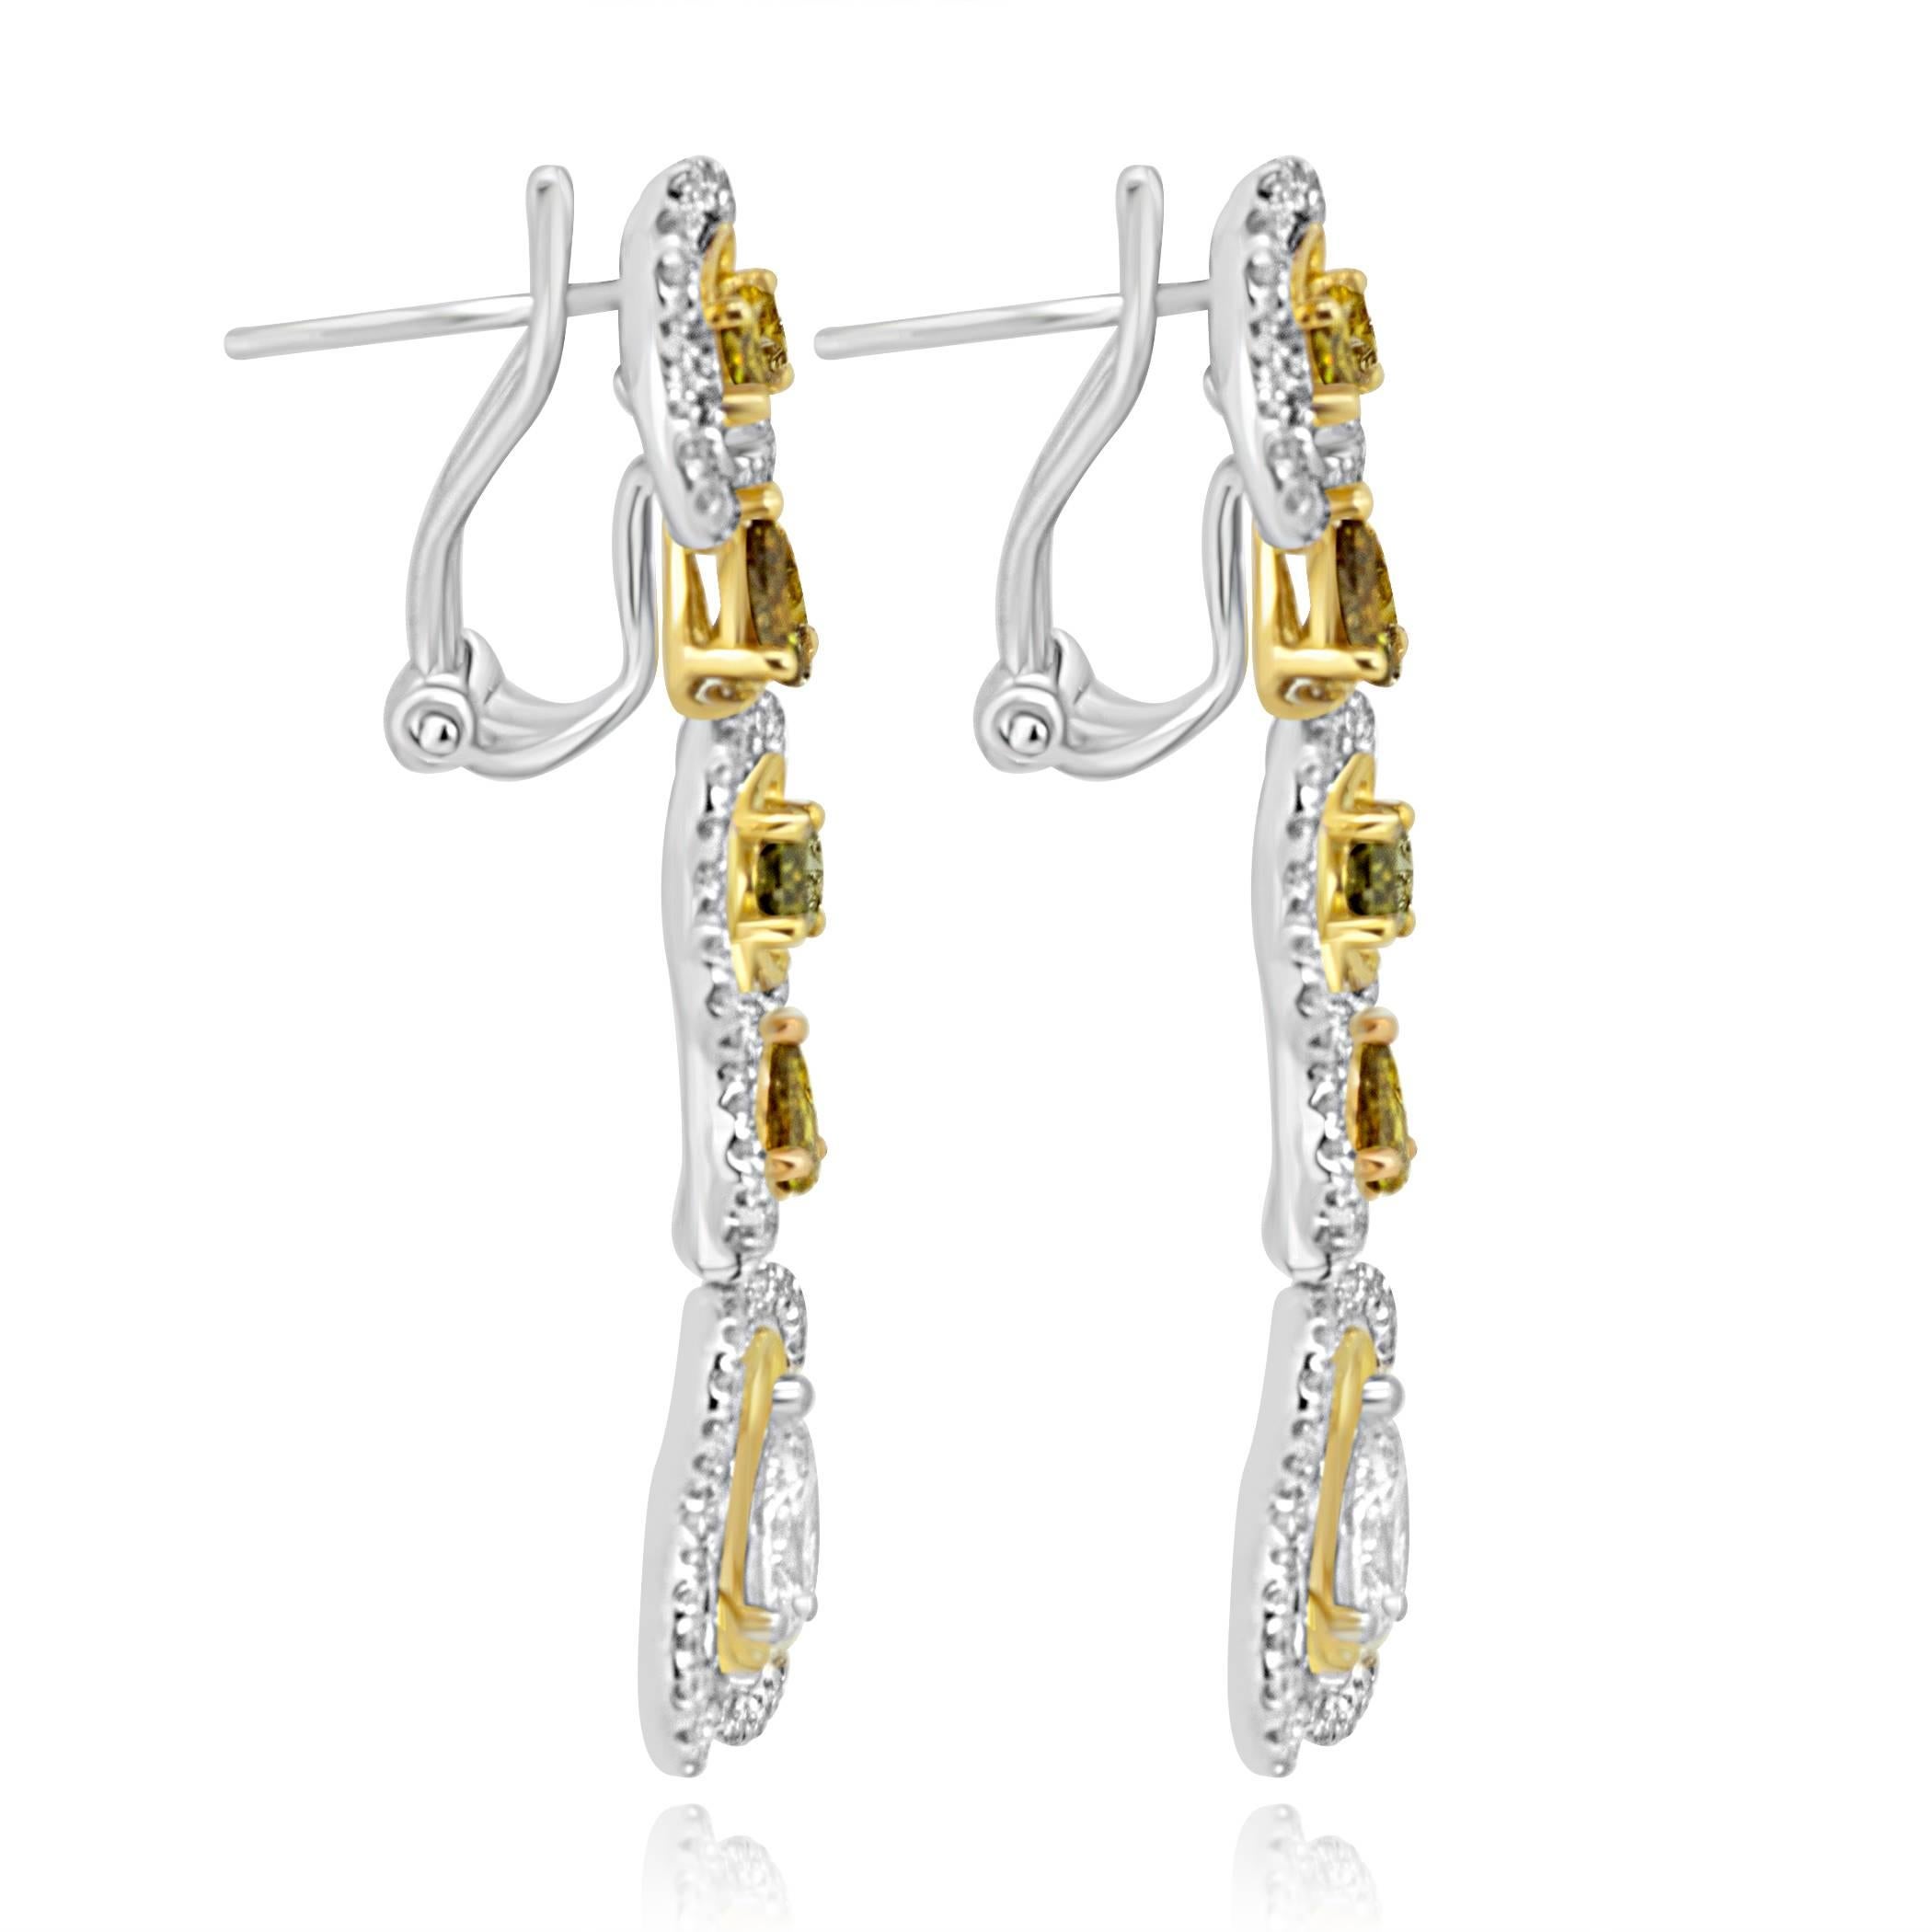 2 White Diamond Pear Shape 0.77 Carat 8 Natural Multi color Diamond Ovals and Pear shape 1.66 Carat with White Diamond Rounds 1.01 Carat around them in One of a Kind 18K White and Yellow Gold Dangling Earring.

Total Diamond Weight 3.44 Carat